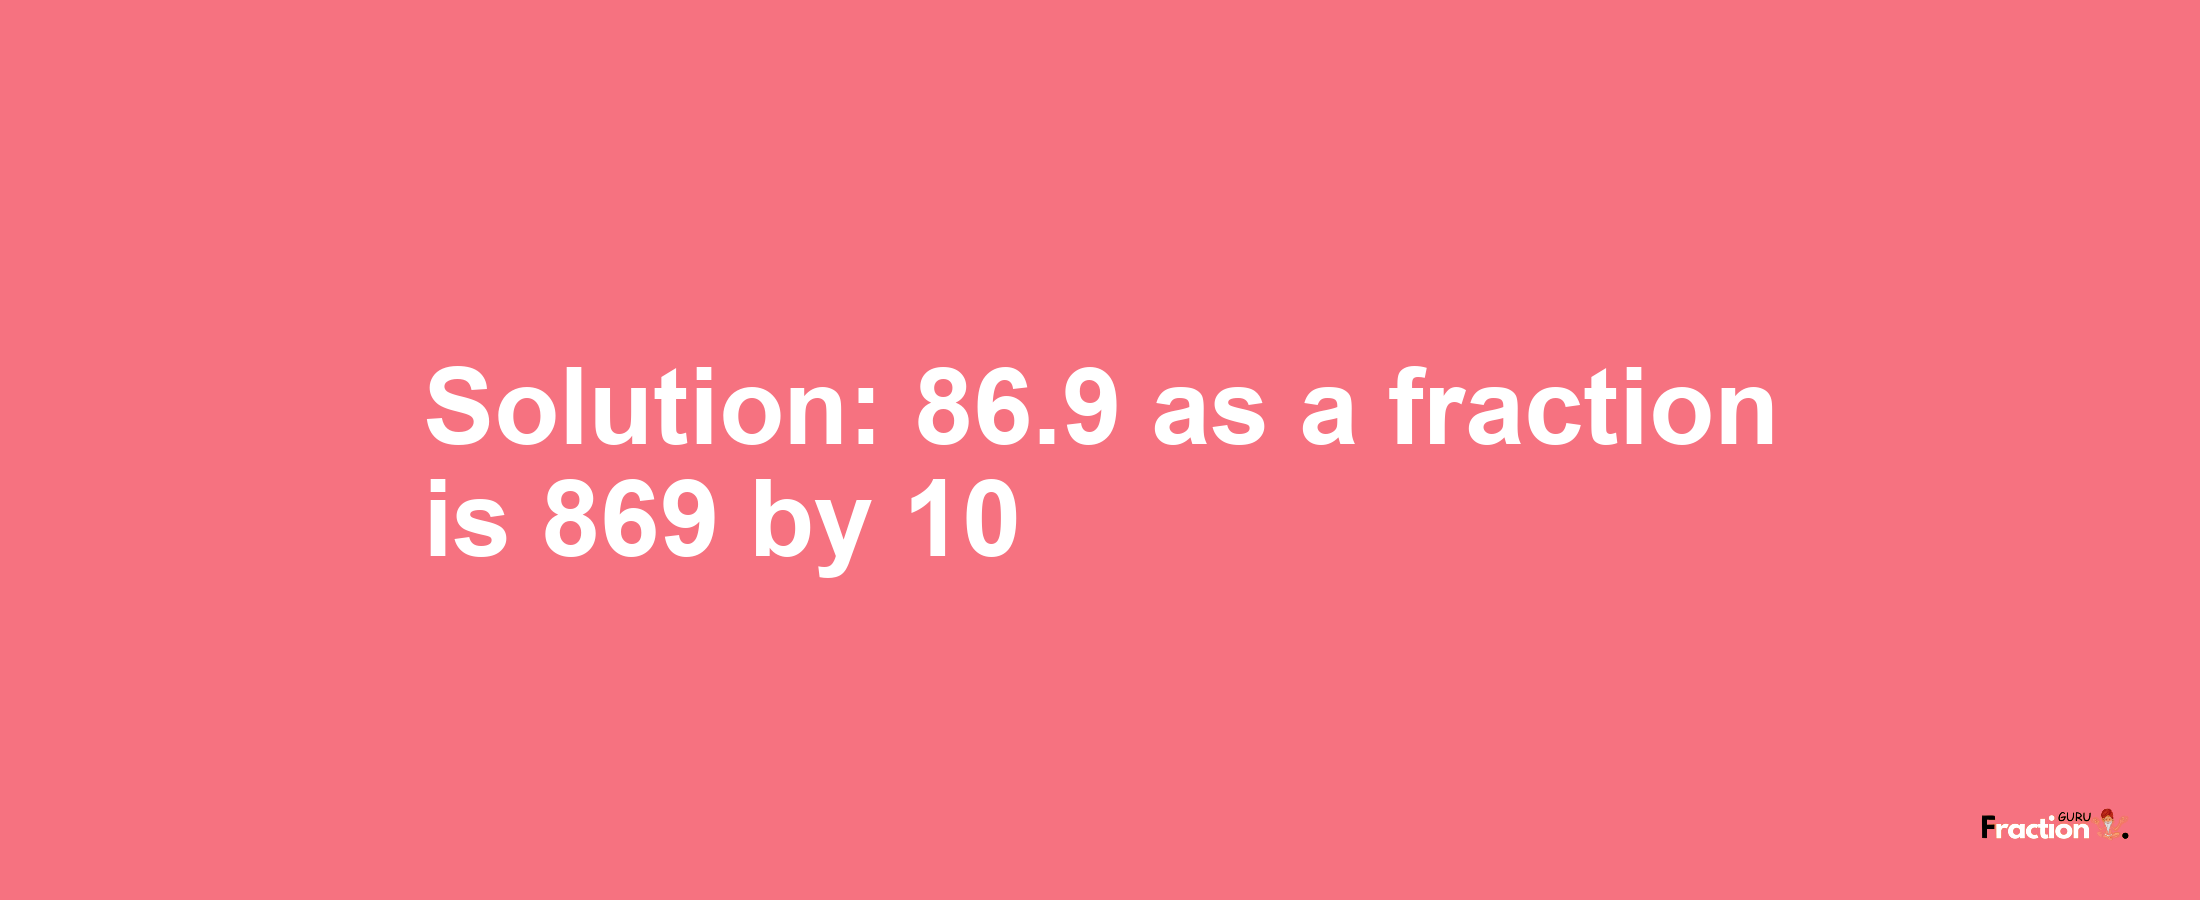 Solution:86.9 as a fraction is 869/10